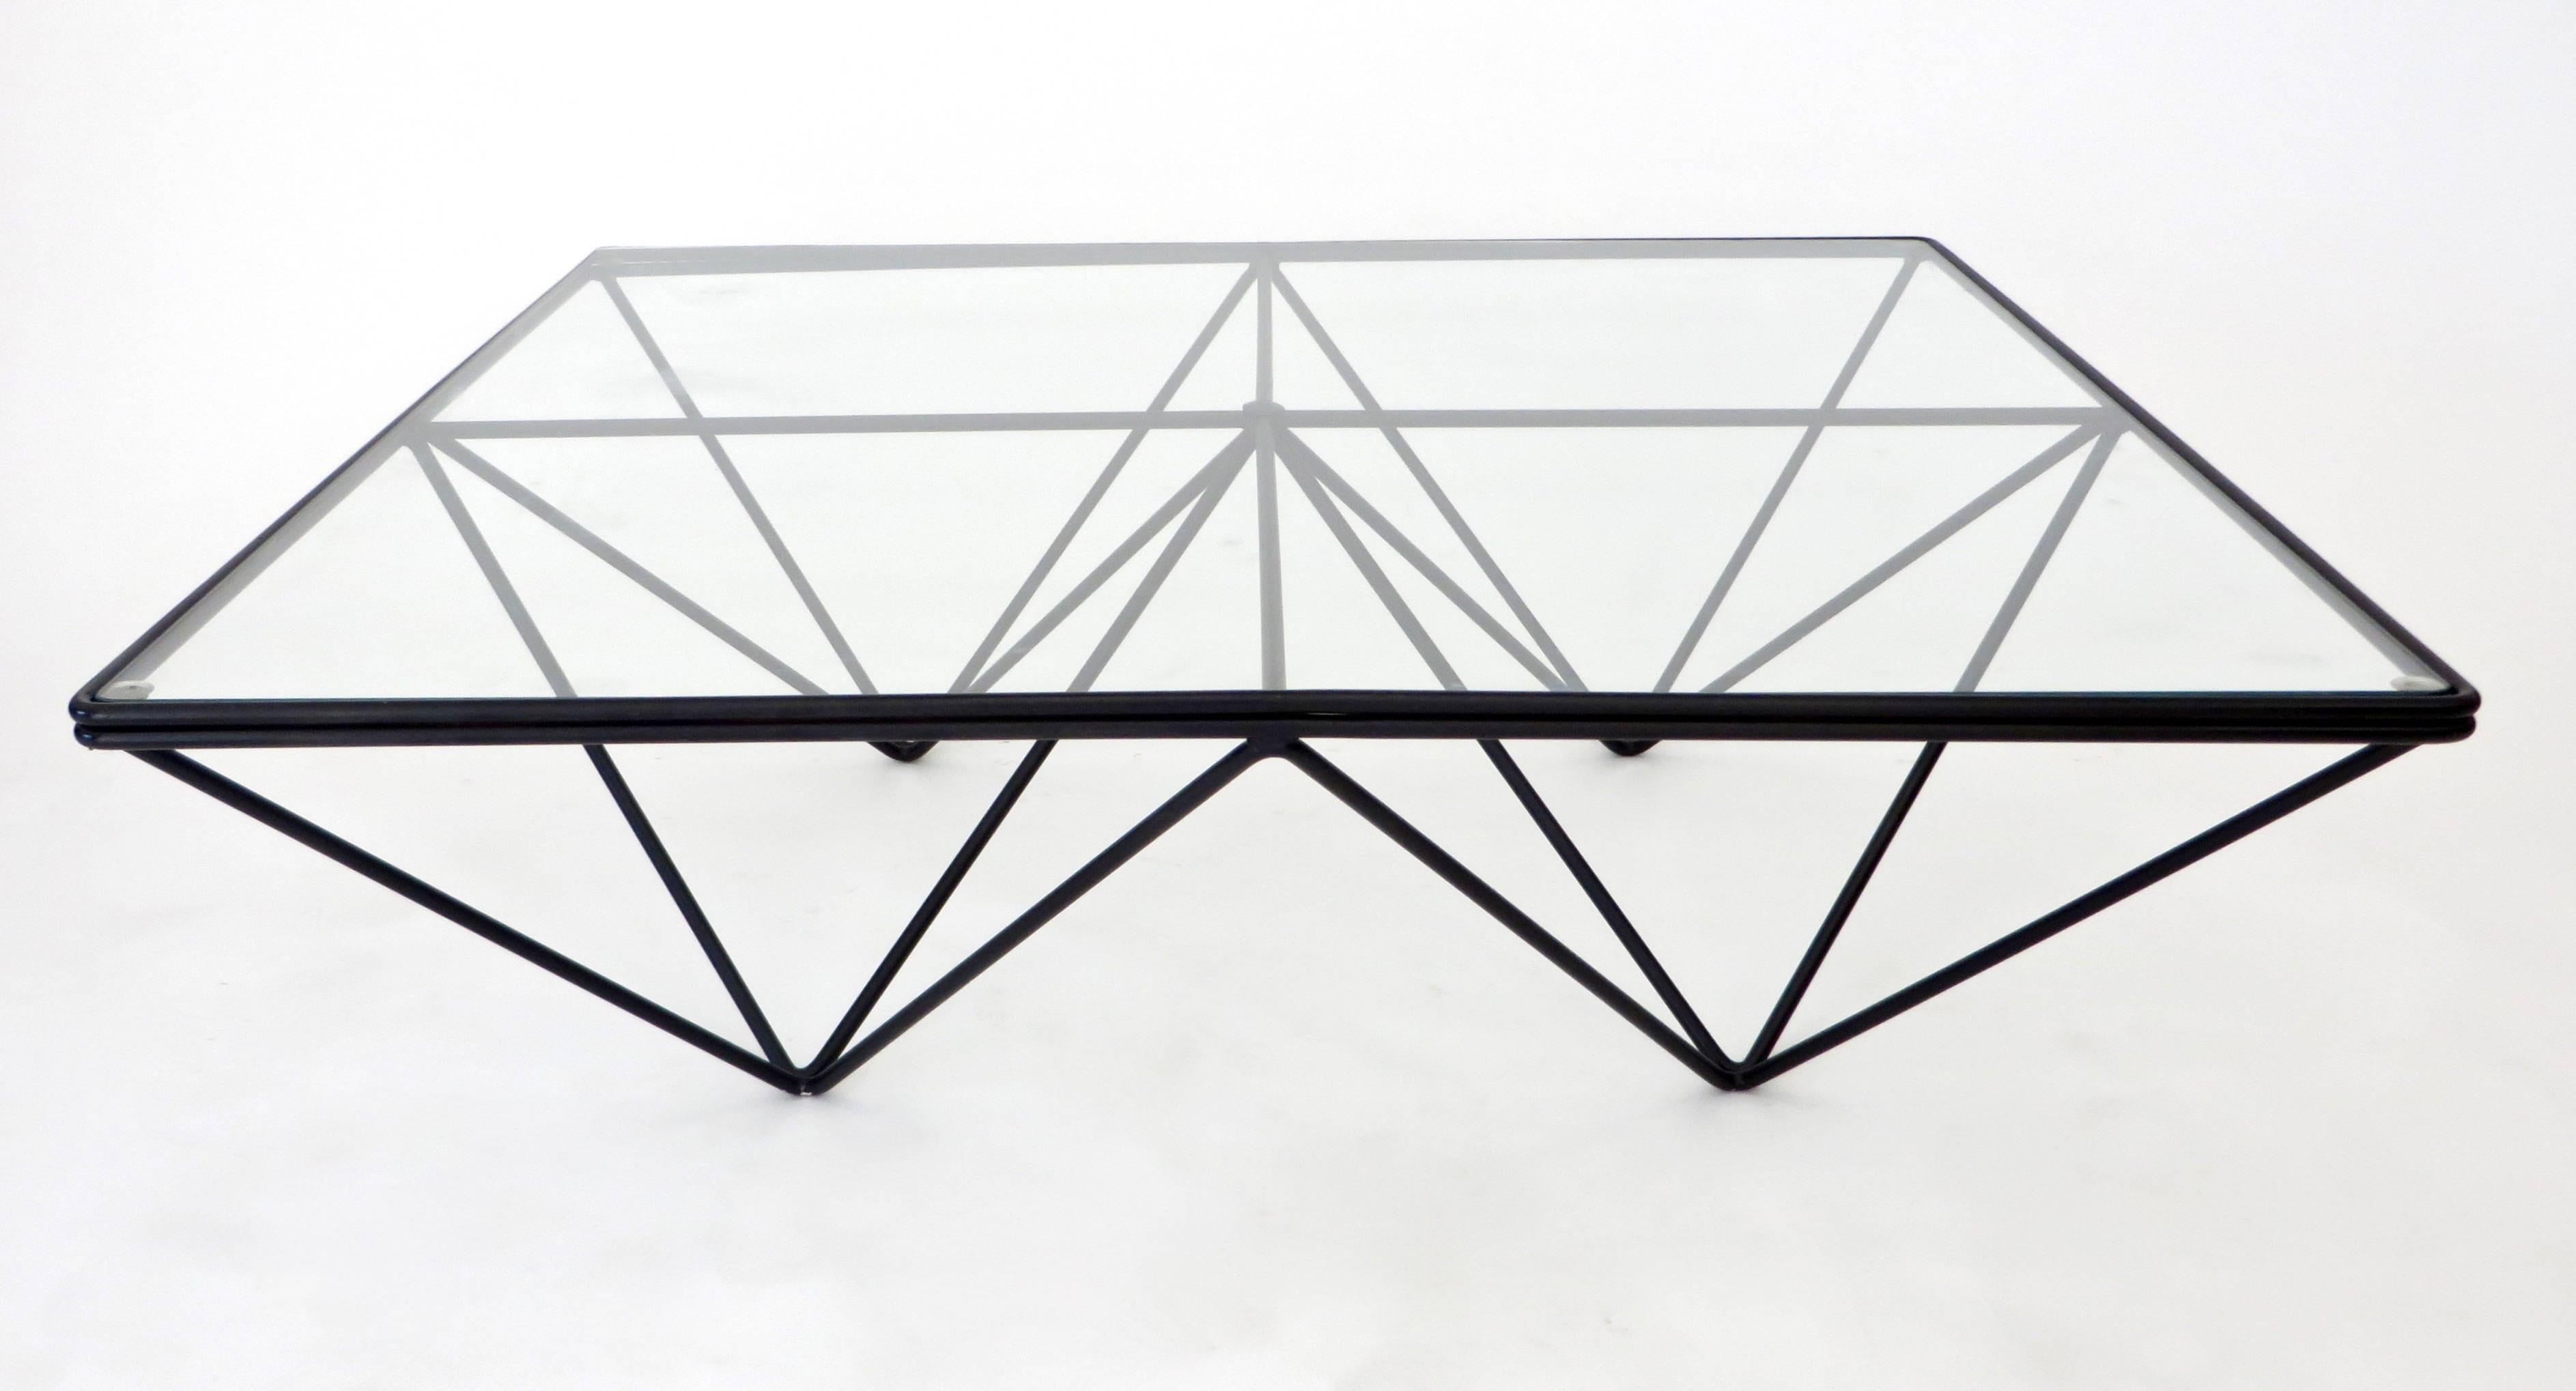 The Alanda low coffee table by Paolo Piva was edition by B&B, Italia, circa 1980. Welded enameled double steel rods with a glass top. 
Very graphic table with large glass plateau. Several sizes were designed and produced, no longer in